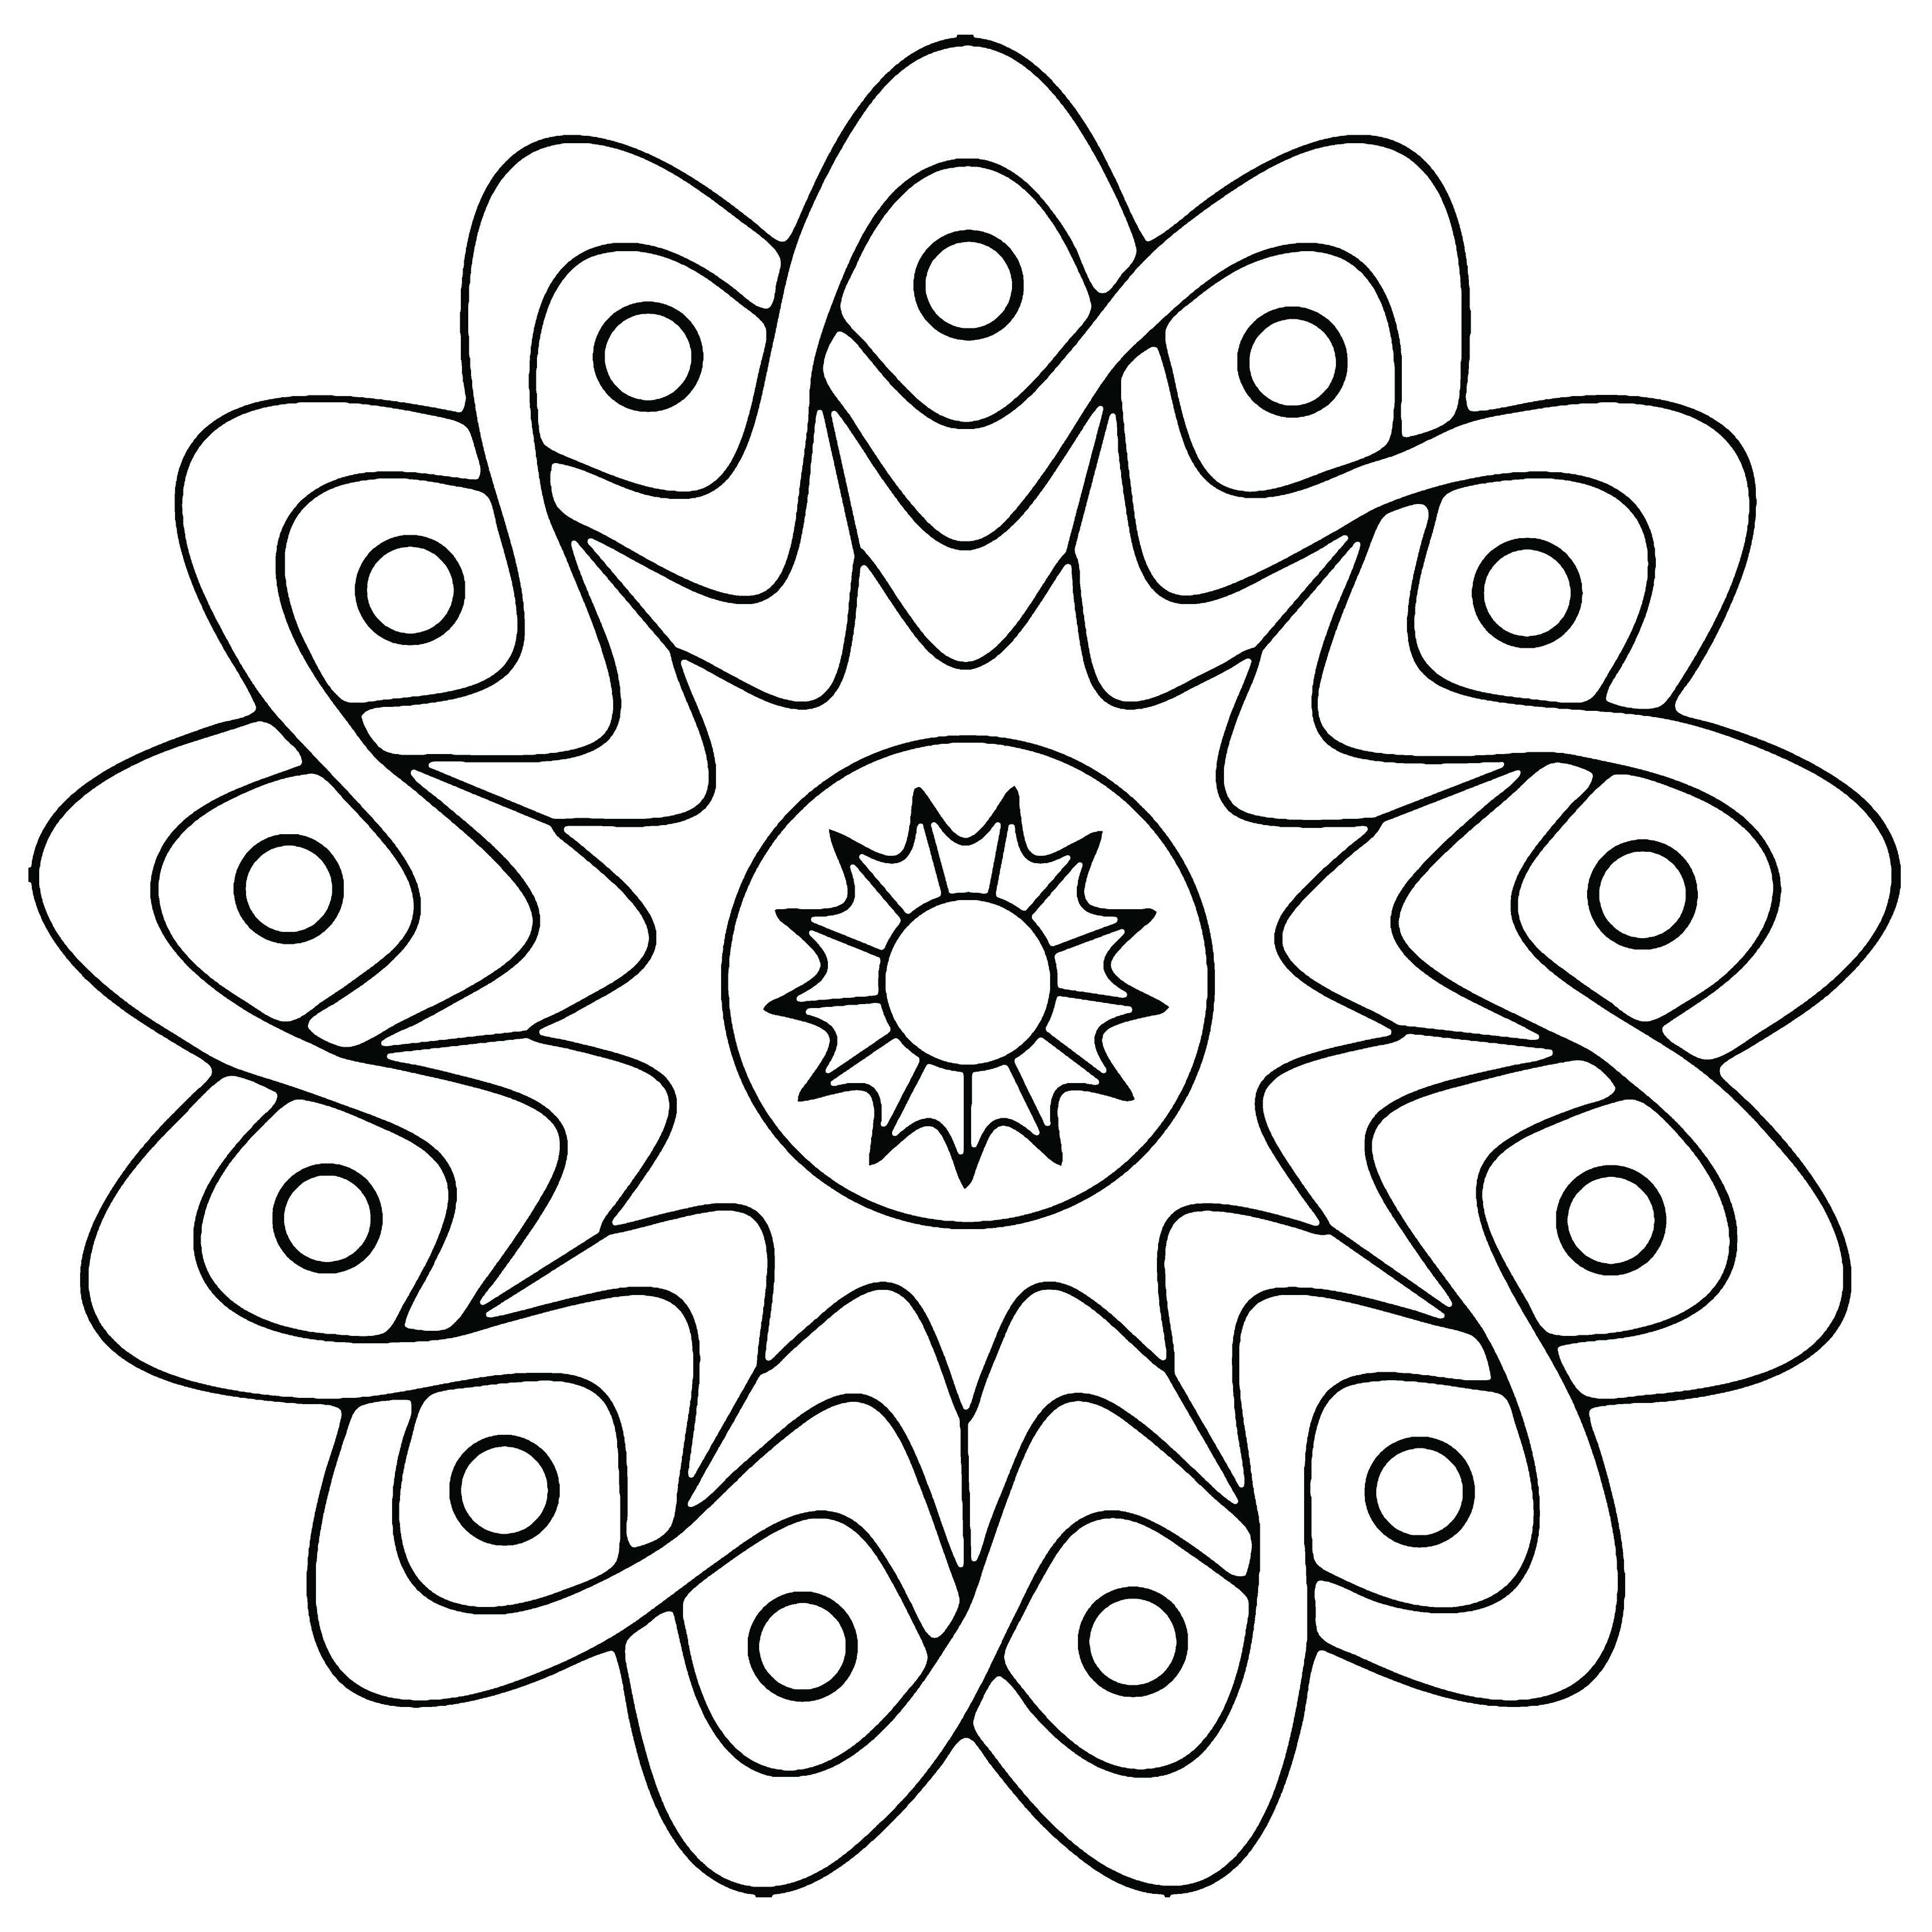 Mandala Coloring Pages Free Online Coloring Ideas Coloring Ideas Advanced Mandala Pages Pdf And Free